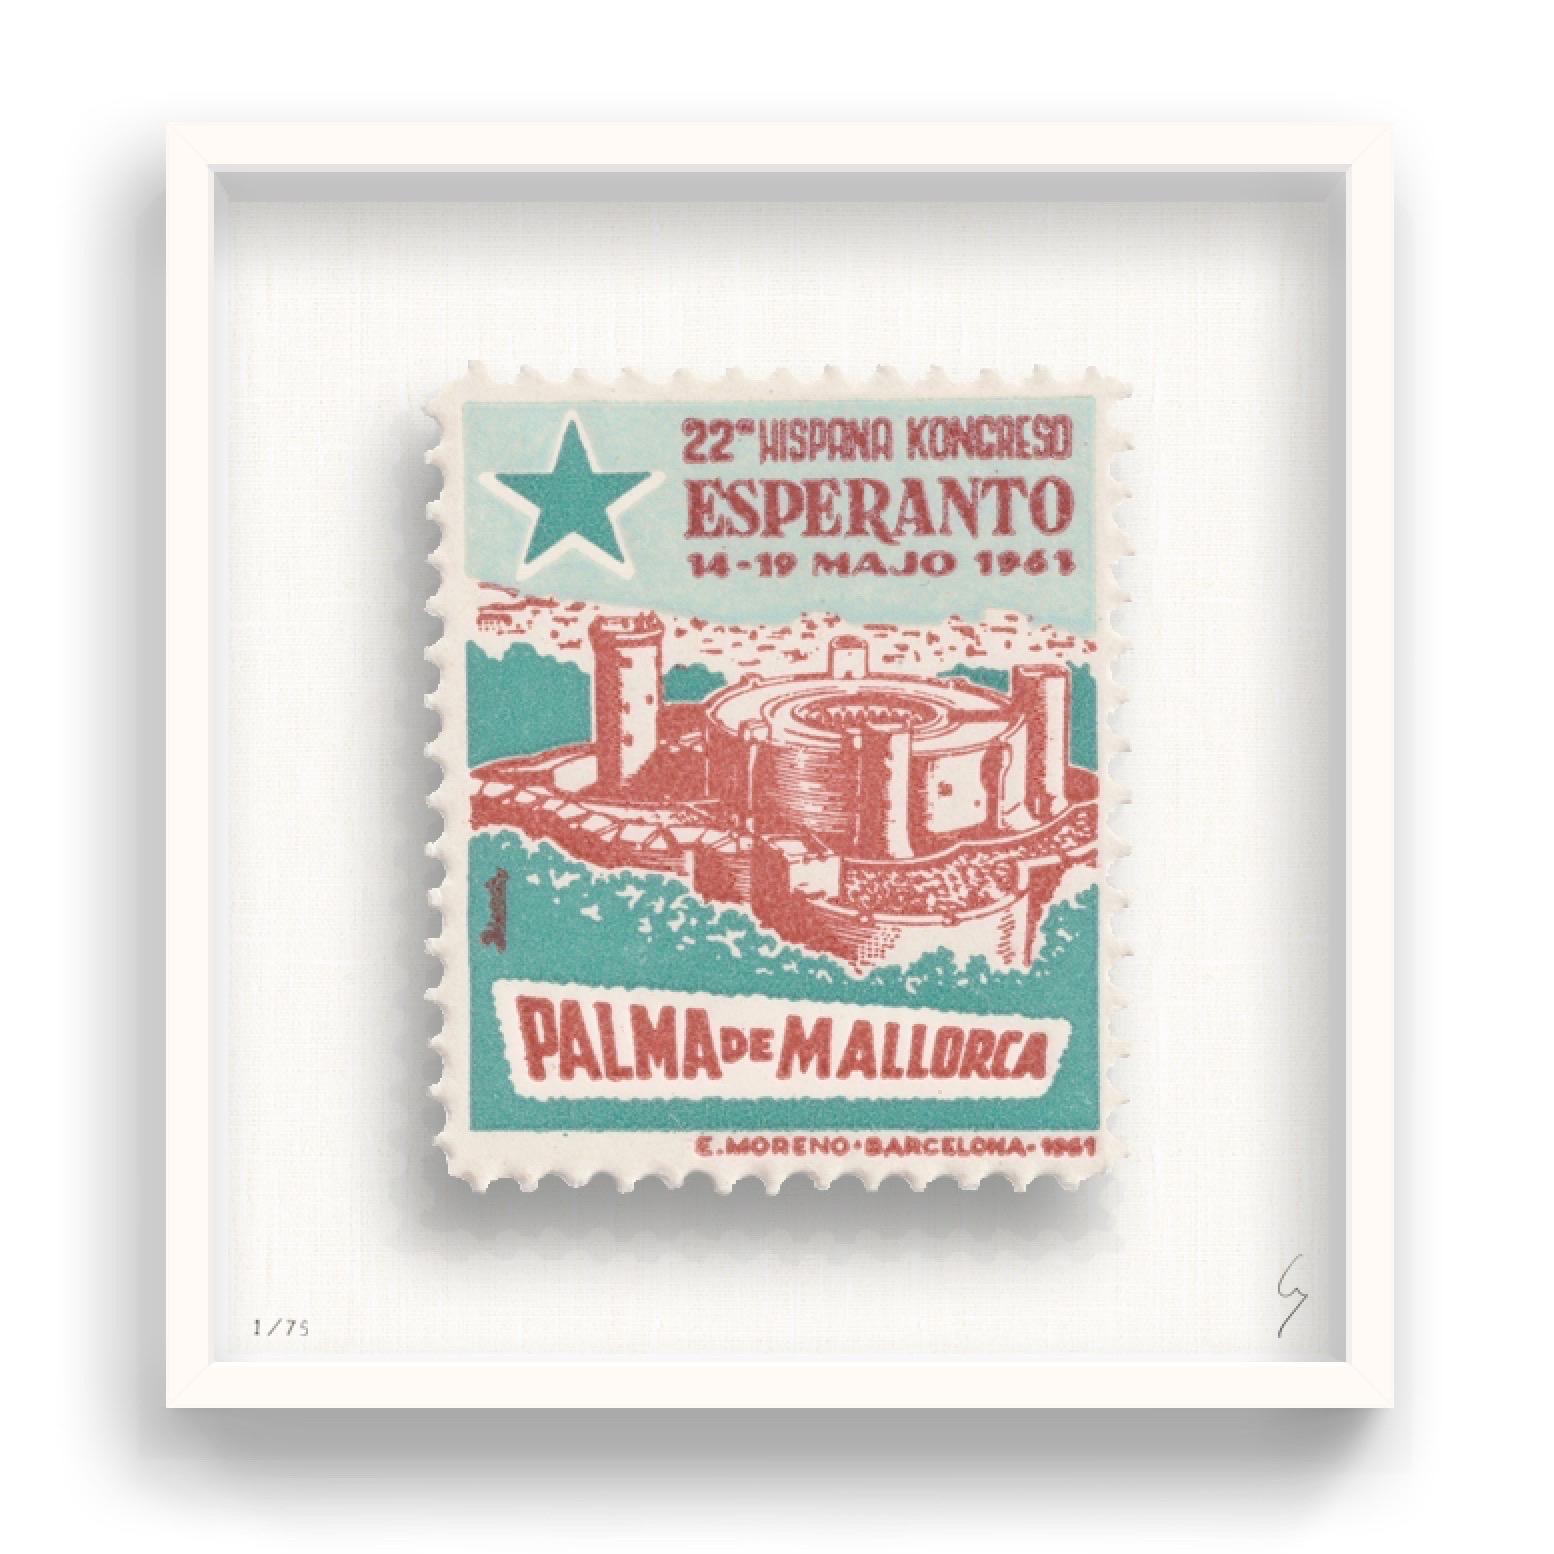 Guy Gee, Mallorca (medium)

Hand-engraved print on 350gsm on G.F Smith card
53 x 56cm (20 4/5 x 22 2/5 in)
Frame included 
Edition of 75 

Each artwork by Guy had been digitally reimagined from an original postage stamp. Cut out and finished by